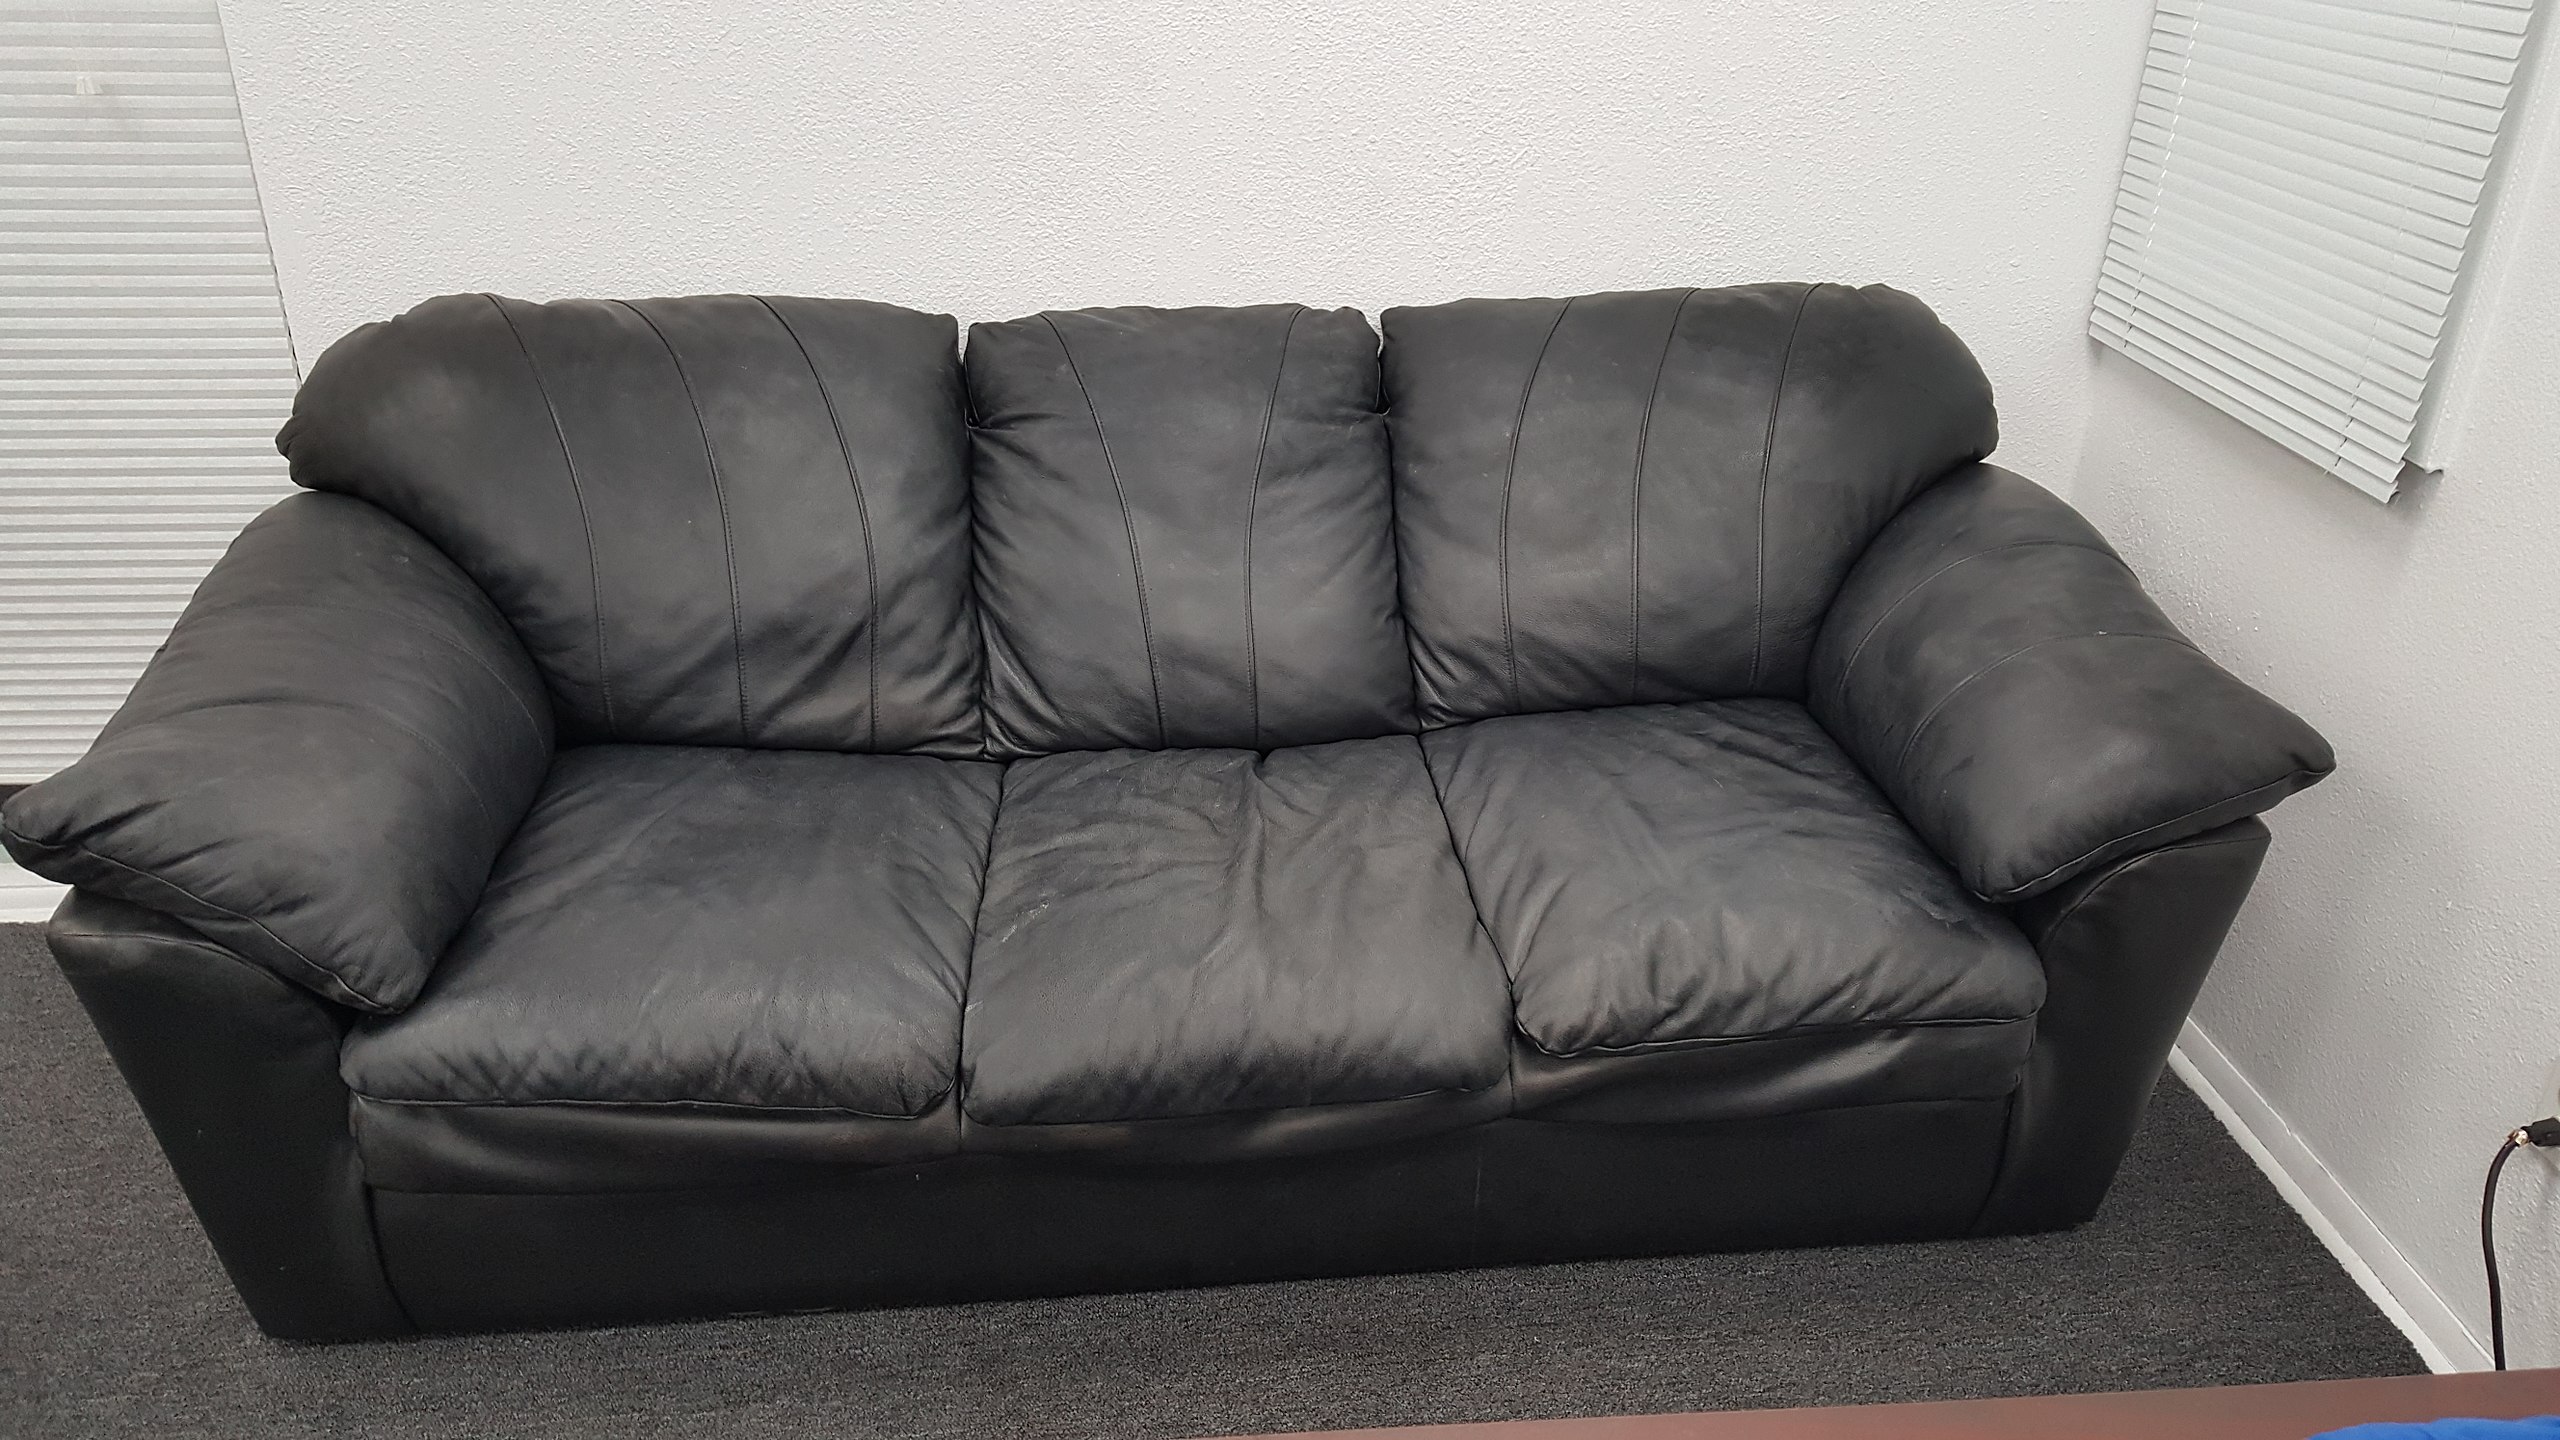 betty almonrode recommends backroom casting couch page pic